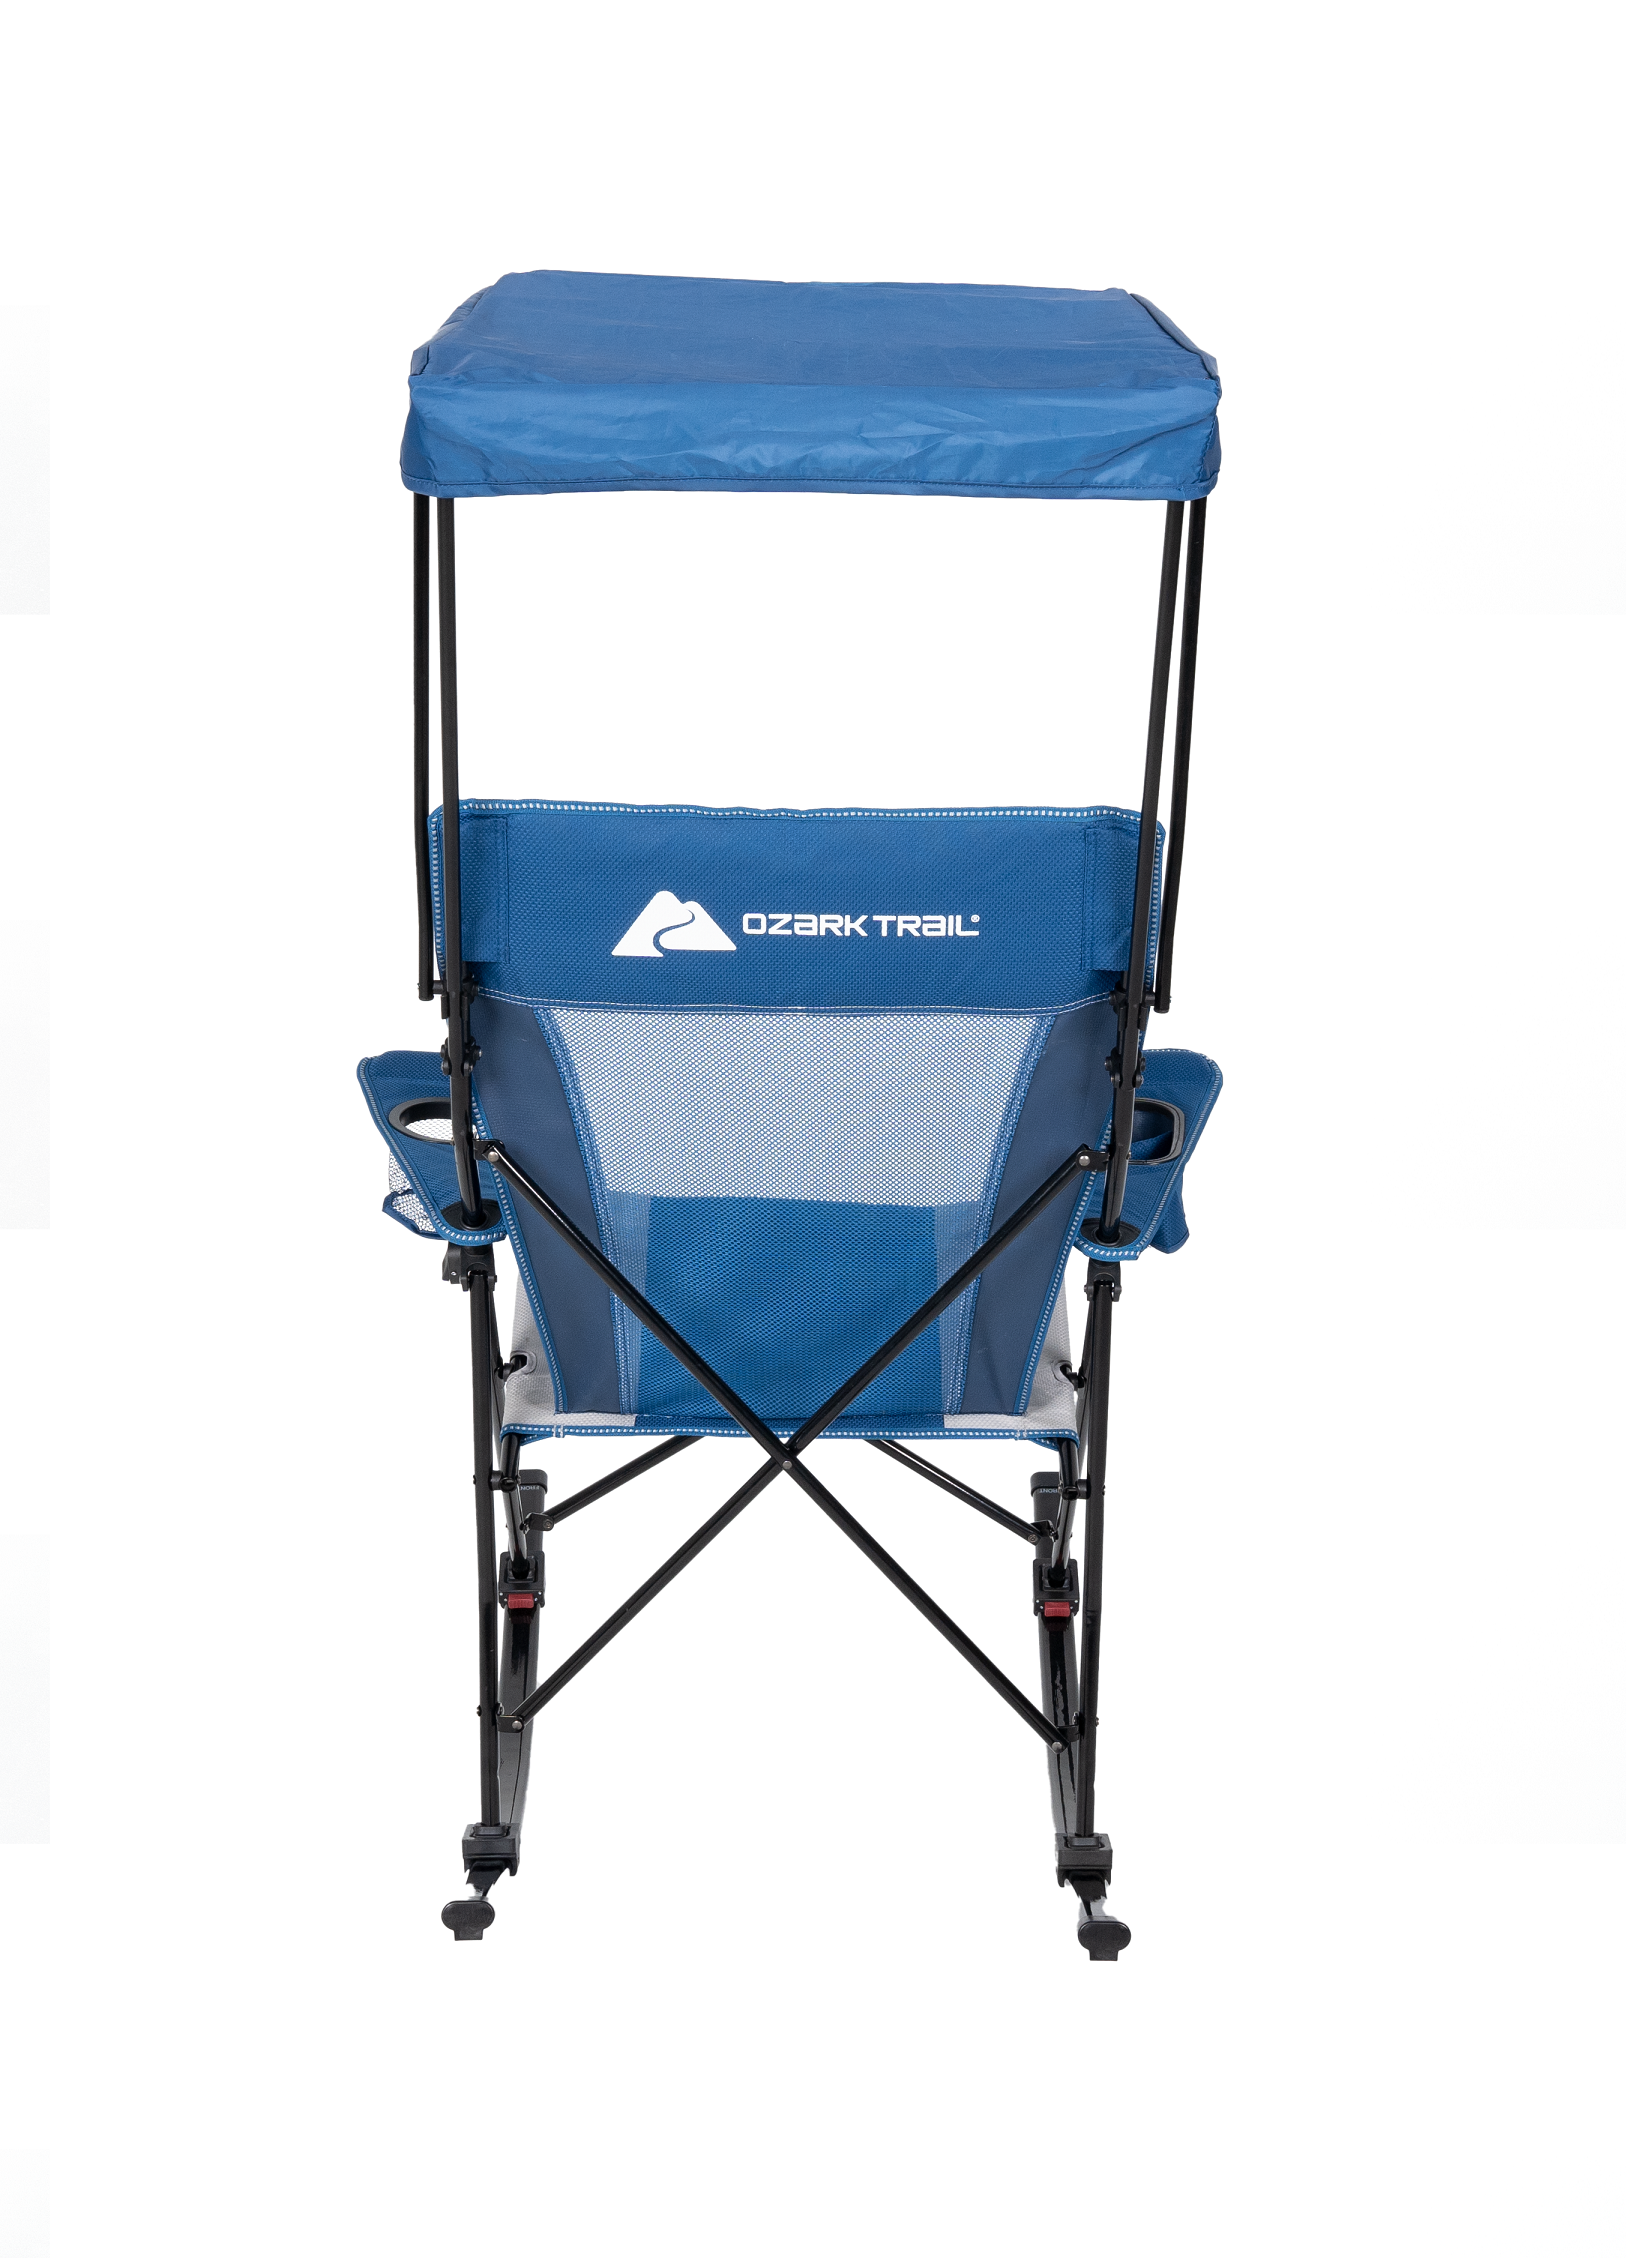 Ozark Trail Mesh Tension Rocking Camp Chair with Canopy,Blue and Grey,Detachable Rockers,Adult